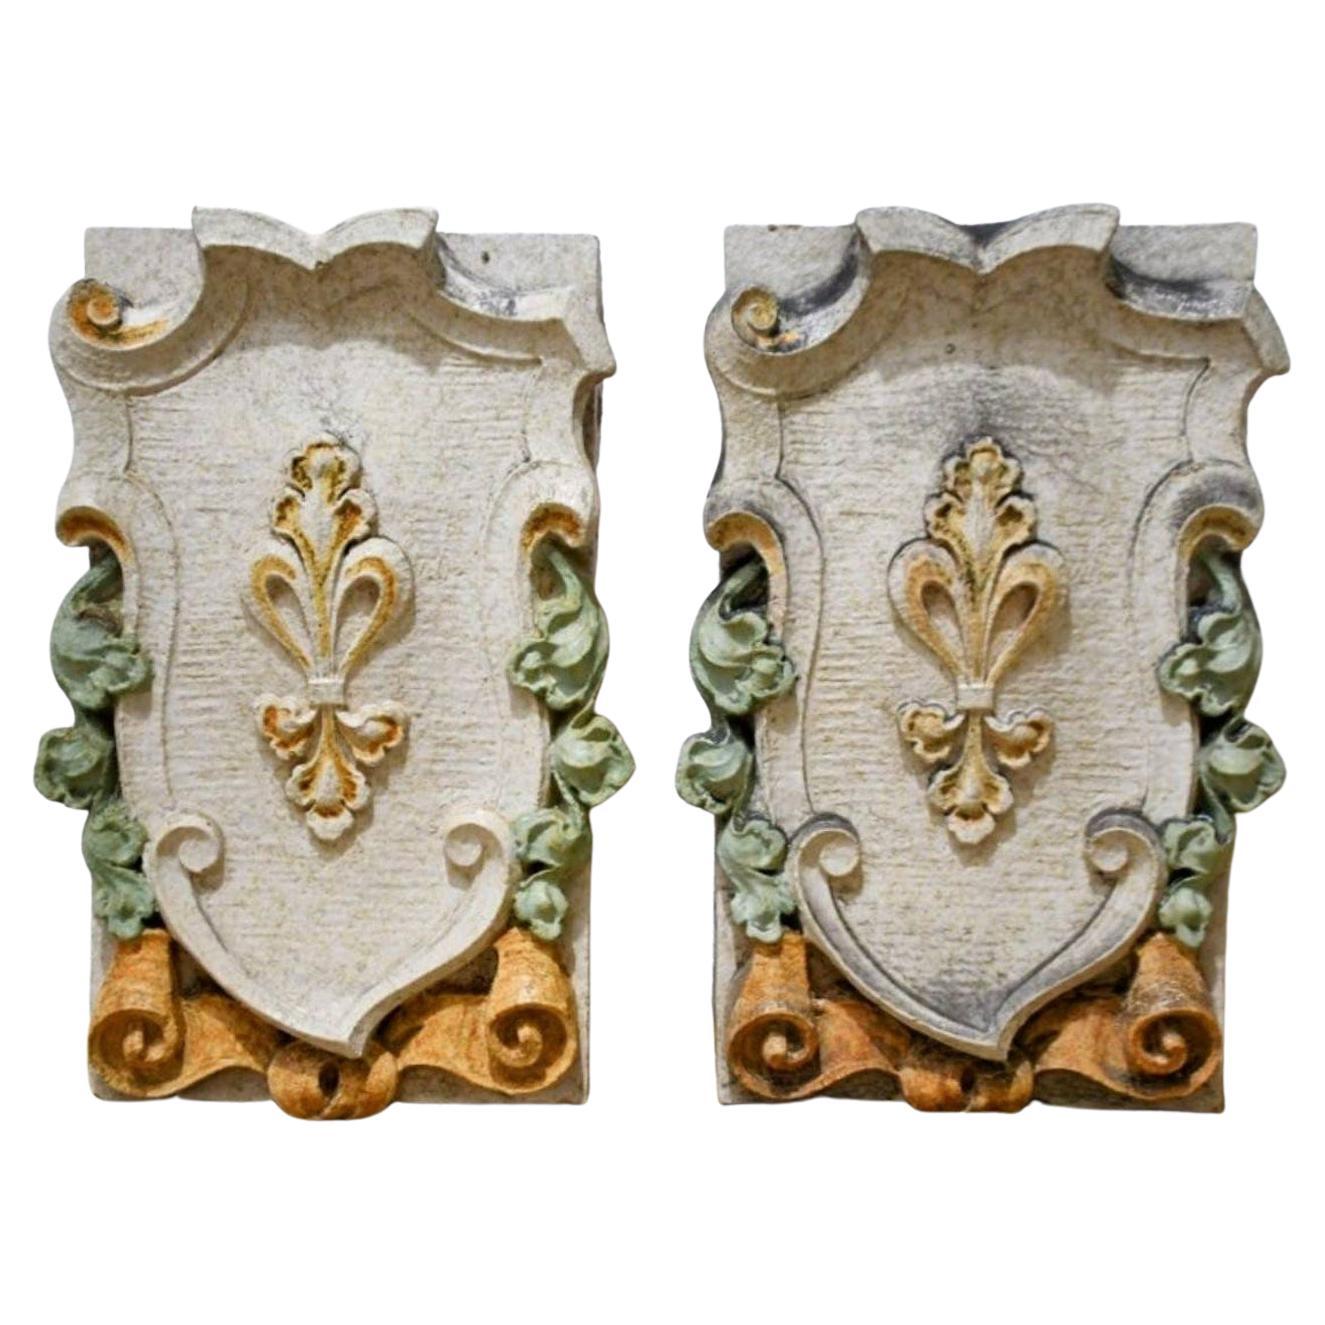 Pair of Antique American Architectural Building Elements For Sale